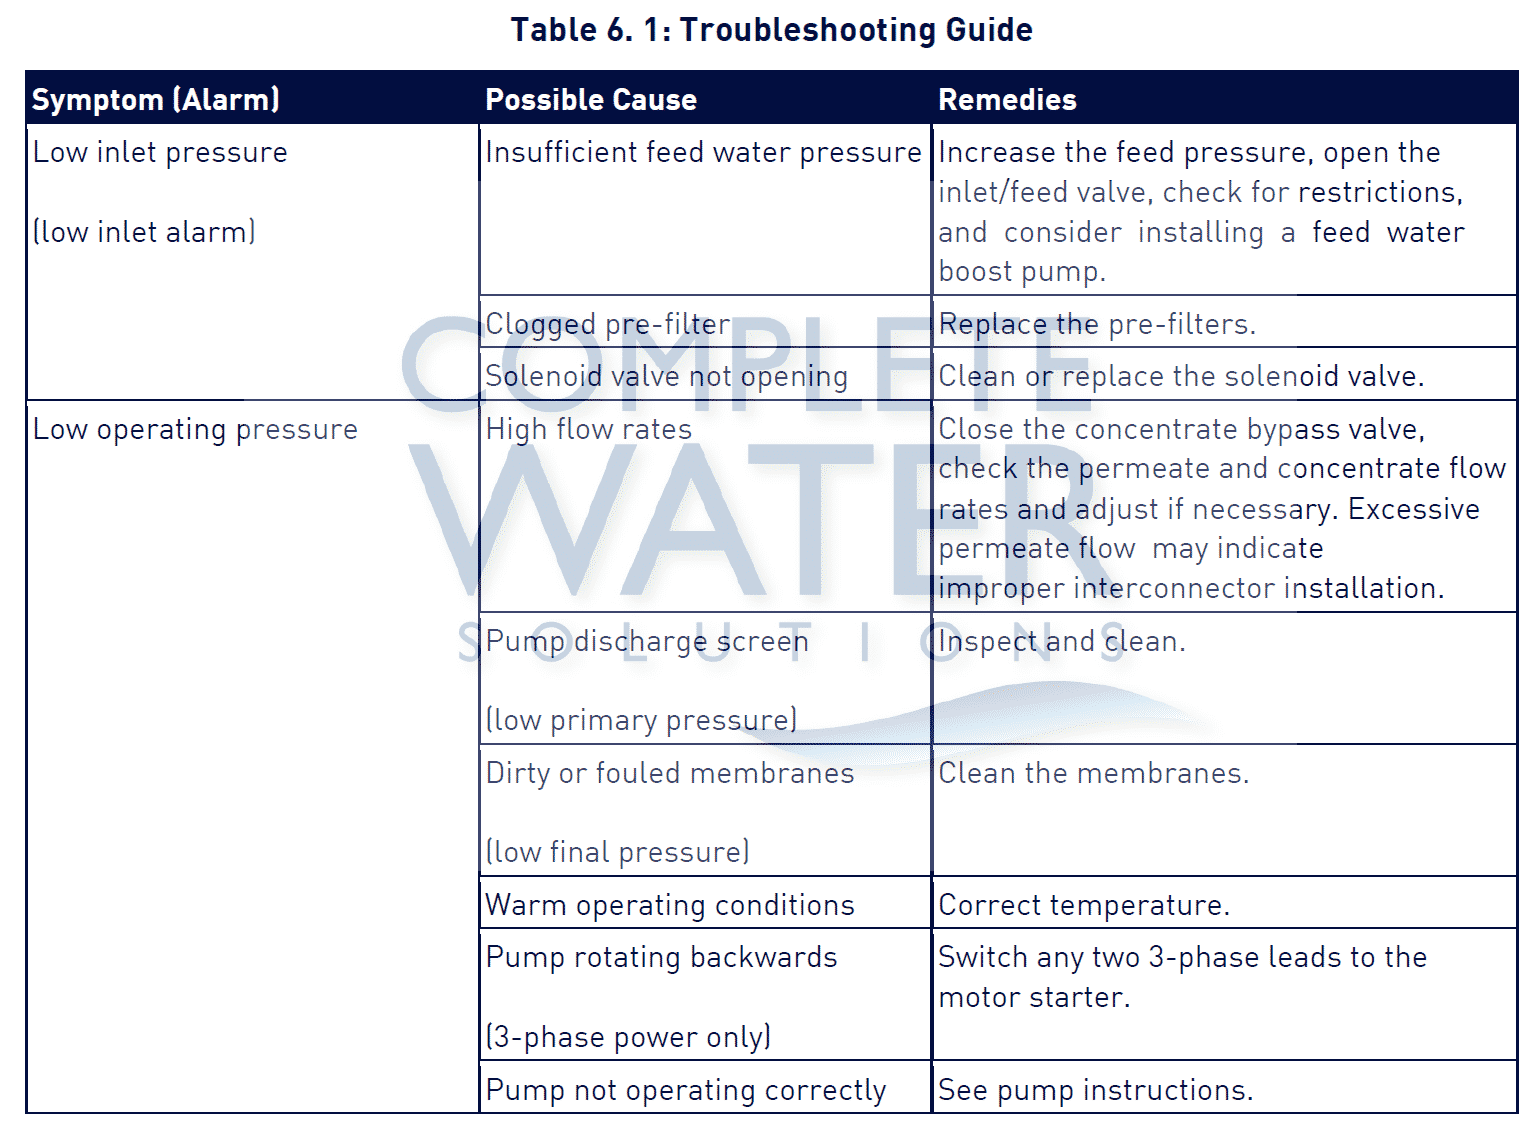 table 6.1 troubleshooting guide 1